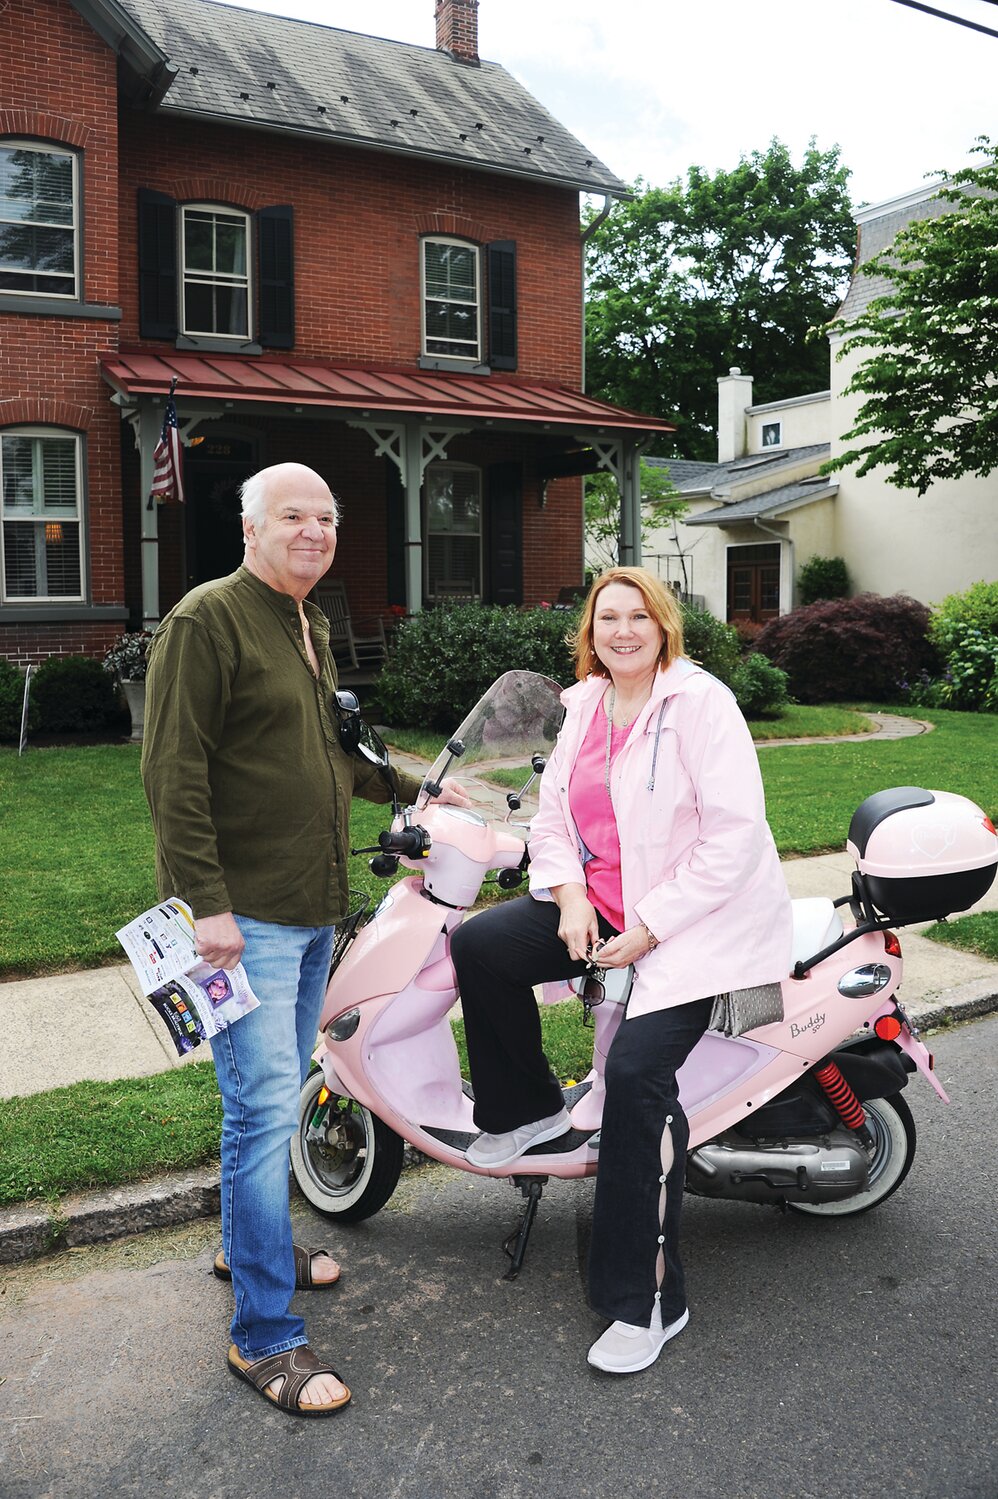 Rich and Donna Guibilo, who traveled the tour on scooters, in front of the Foster residence.